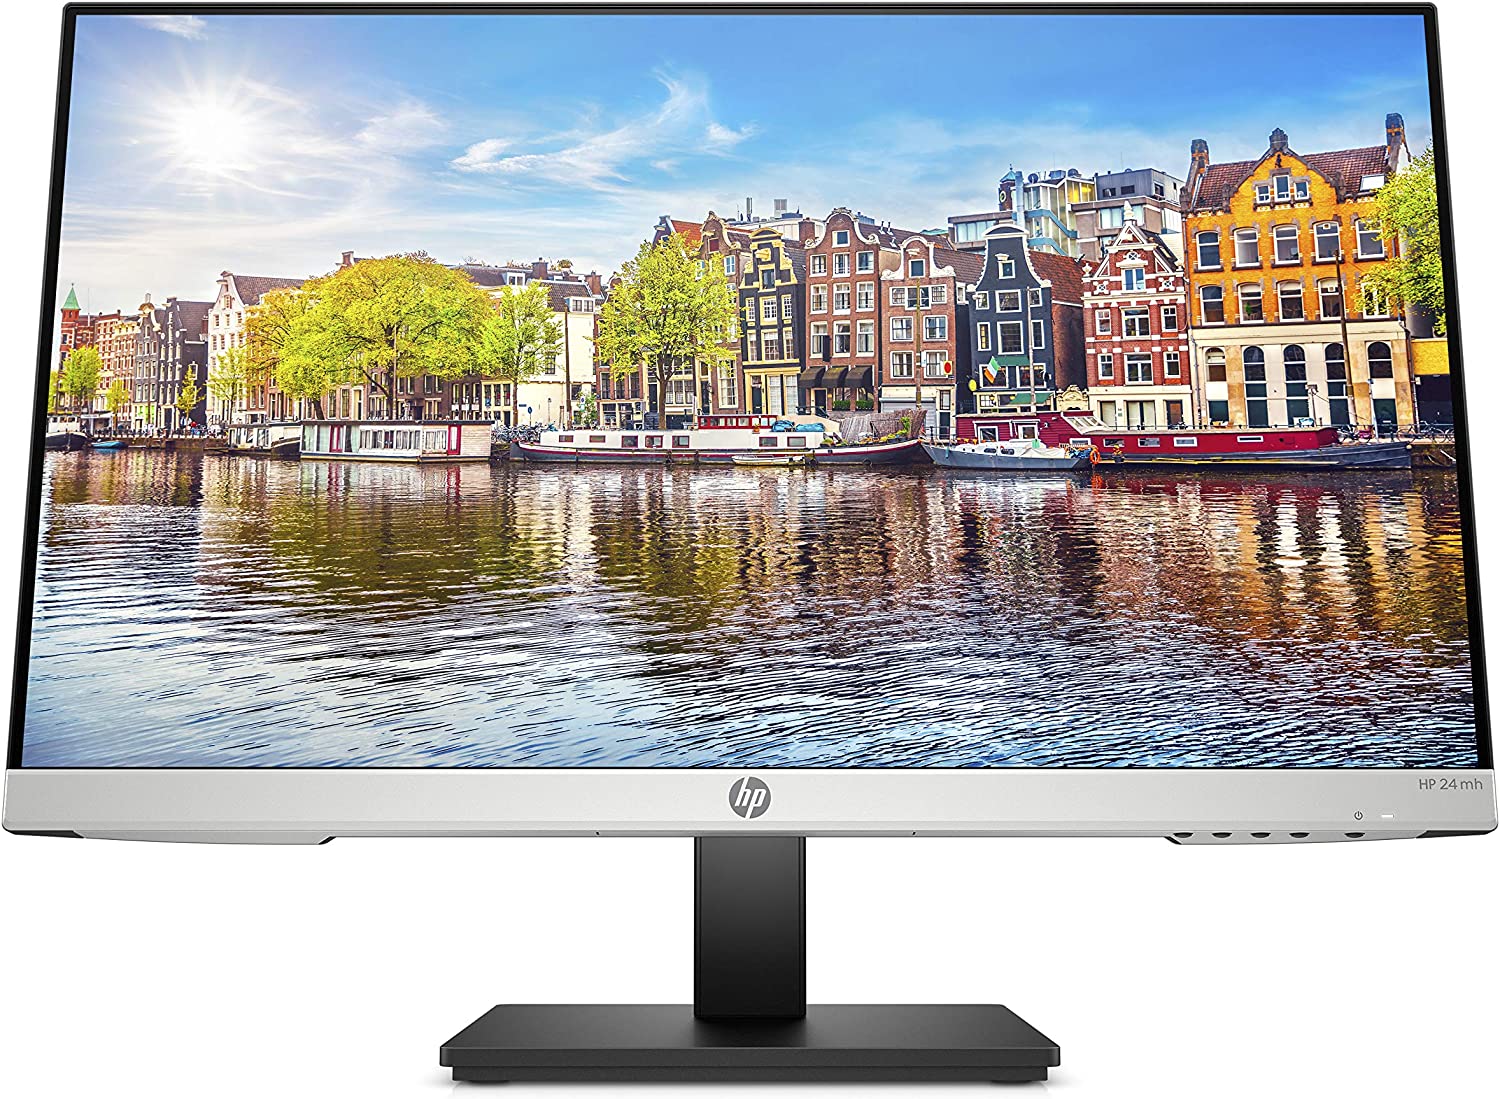 HP 24MH FHD 23.8 INCH MONITOR WITH 2 HDMI PORTS